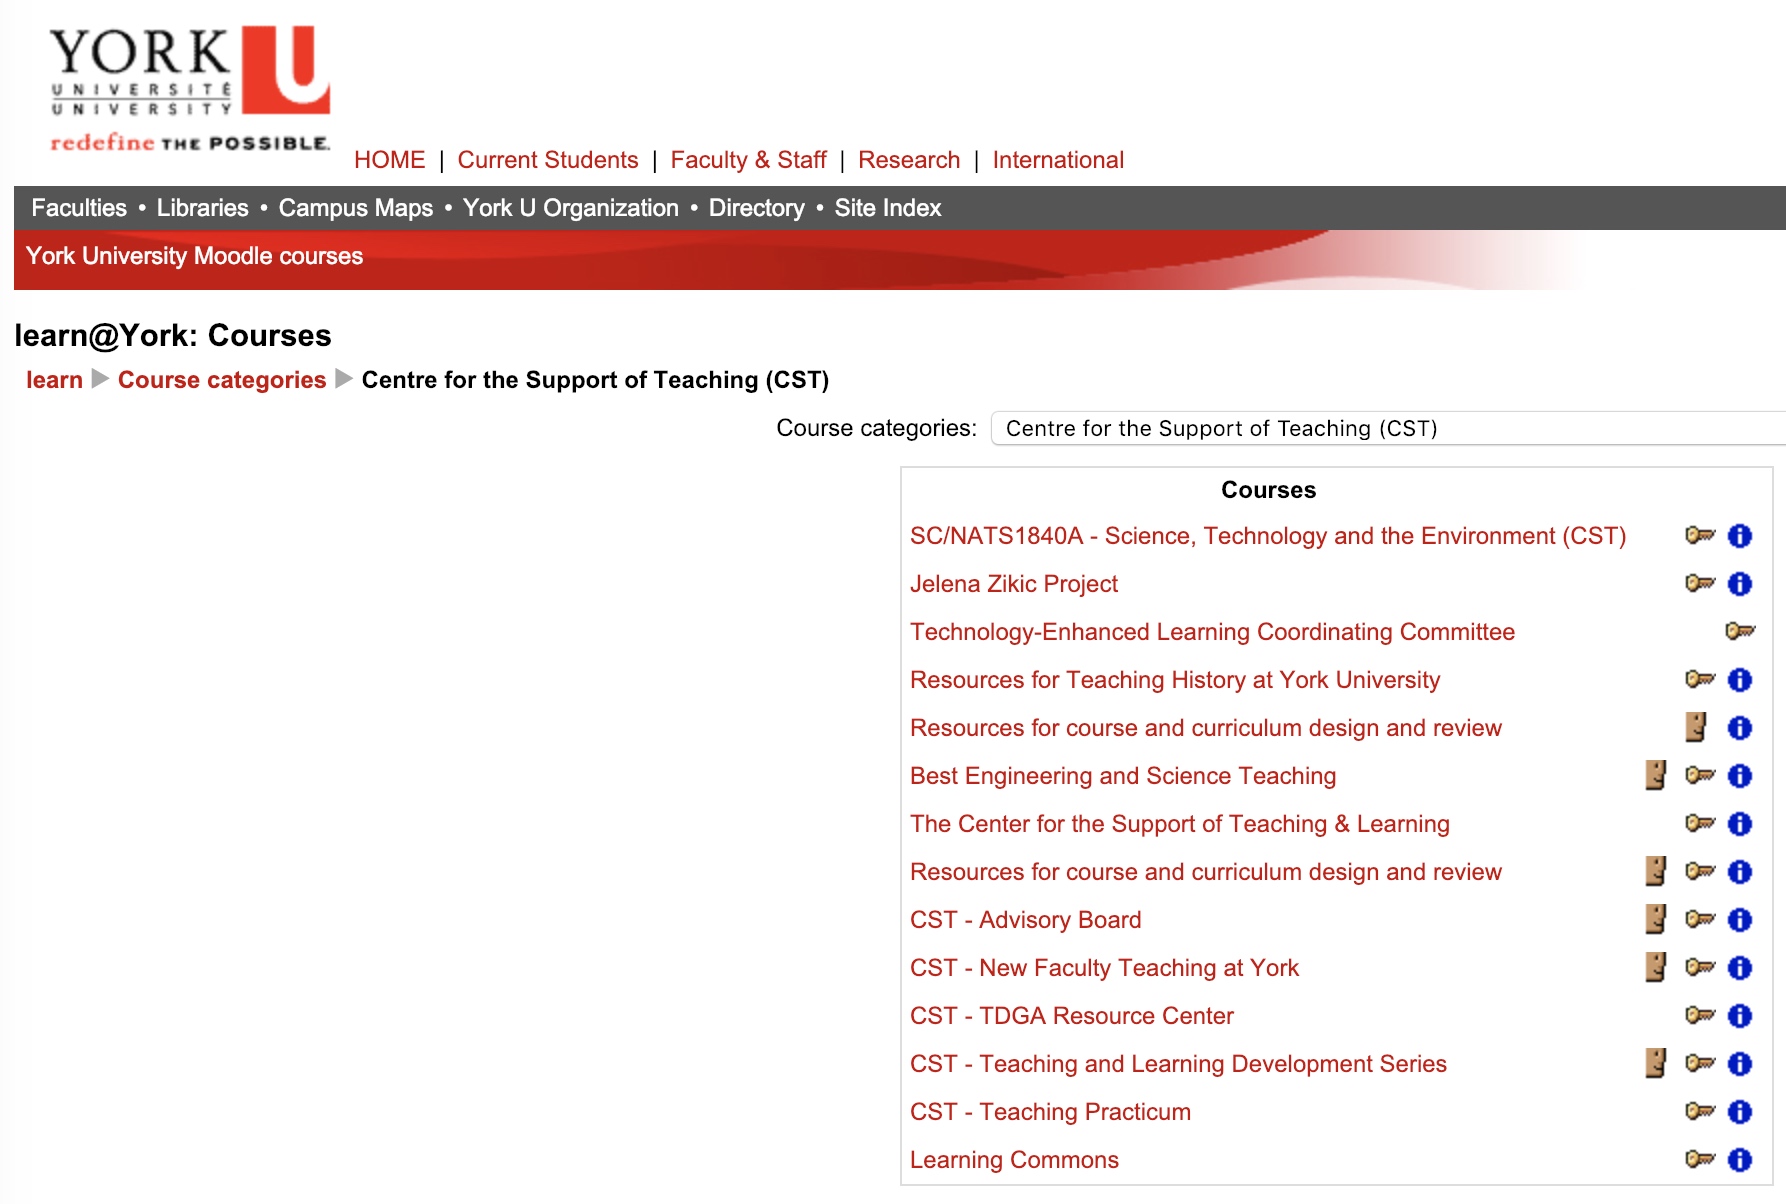 Some York University Centre for Support of Teaching Courses